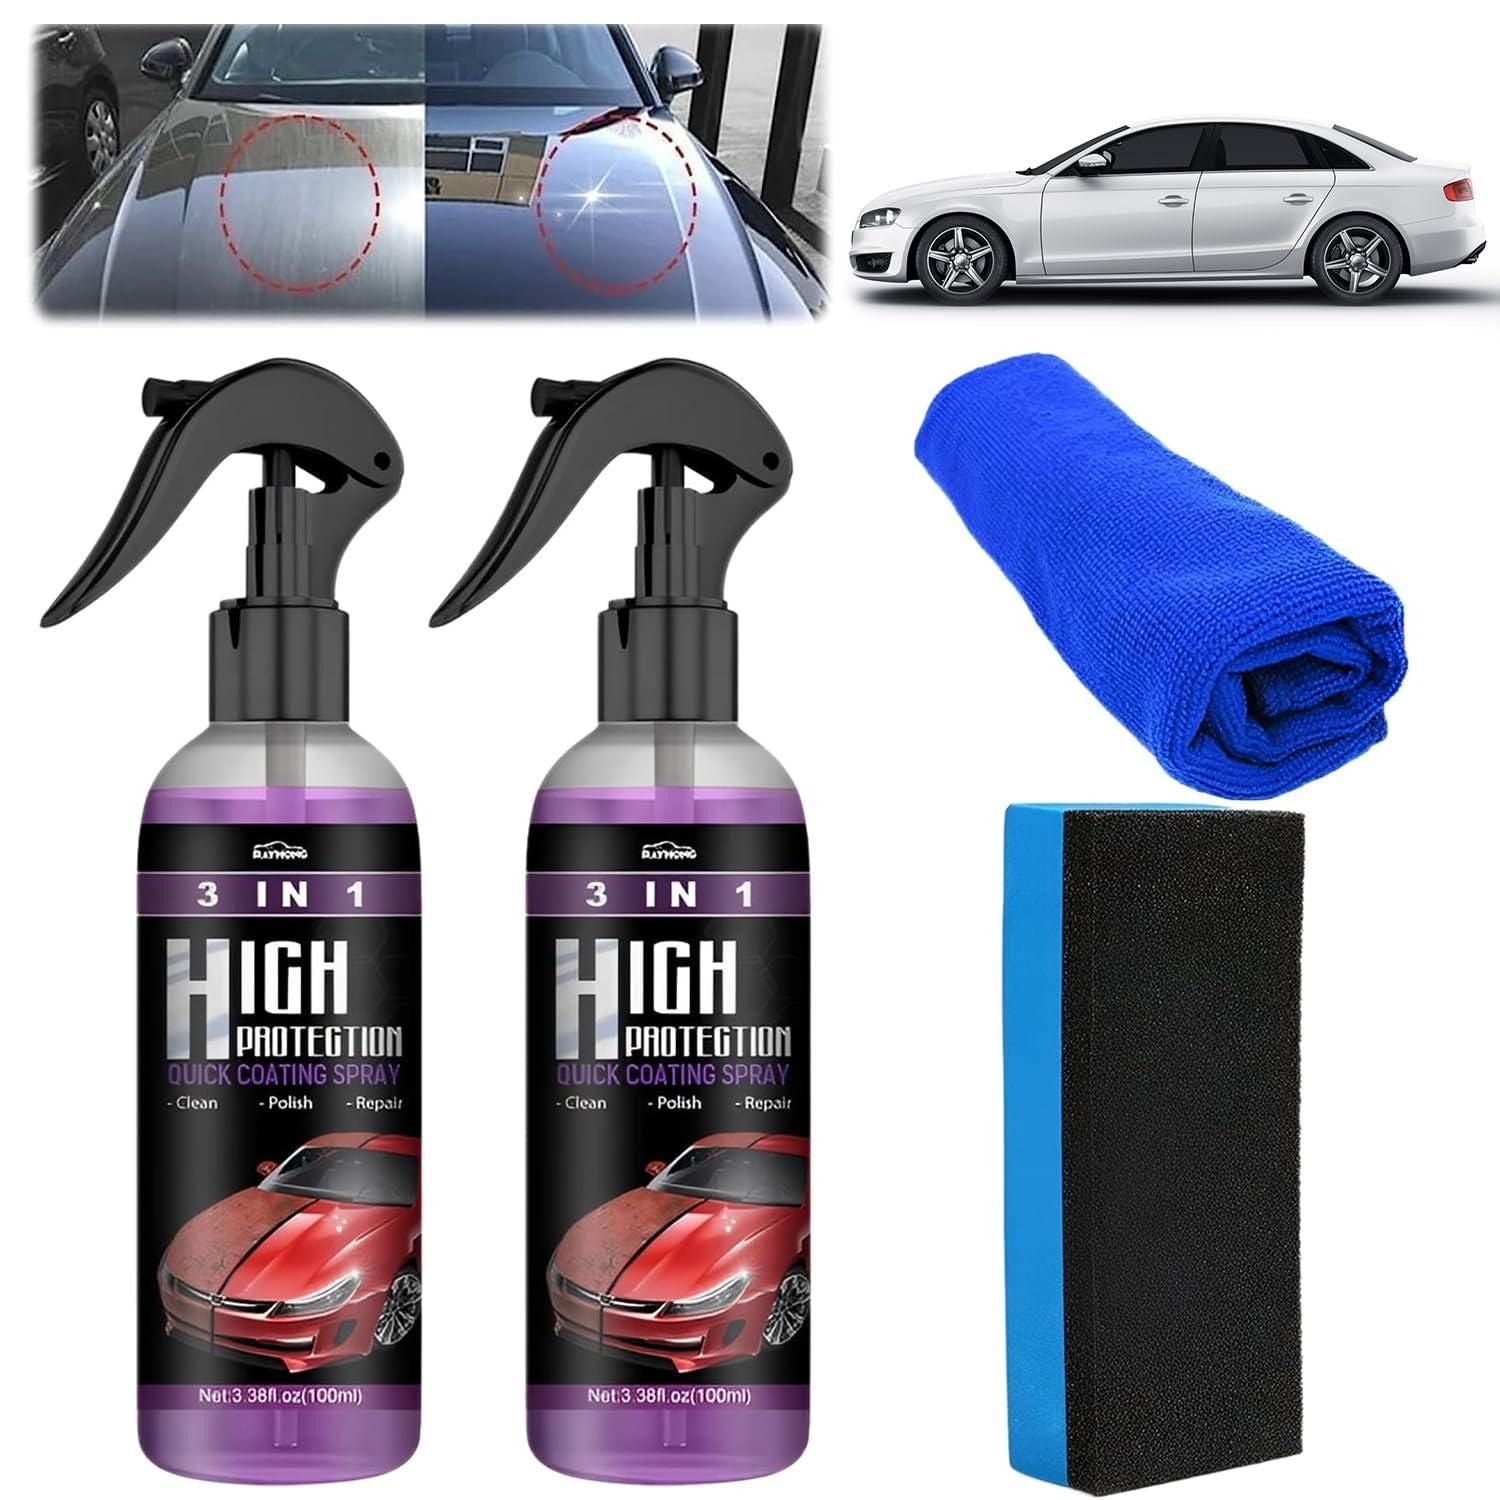 High Protection 3 in 1 Quick Coating Spray - Scratch Repair, Fast Wax  Polishing, Plastic Refresher Quick Car Ceramic Coating Spray with Sponge  and